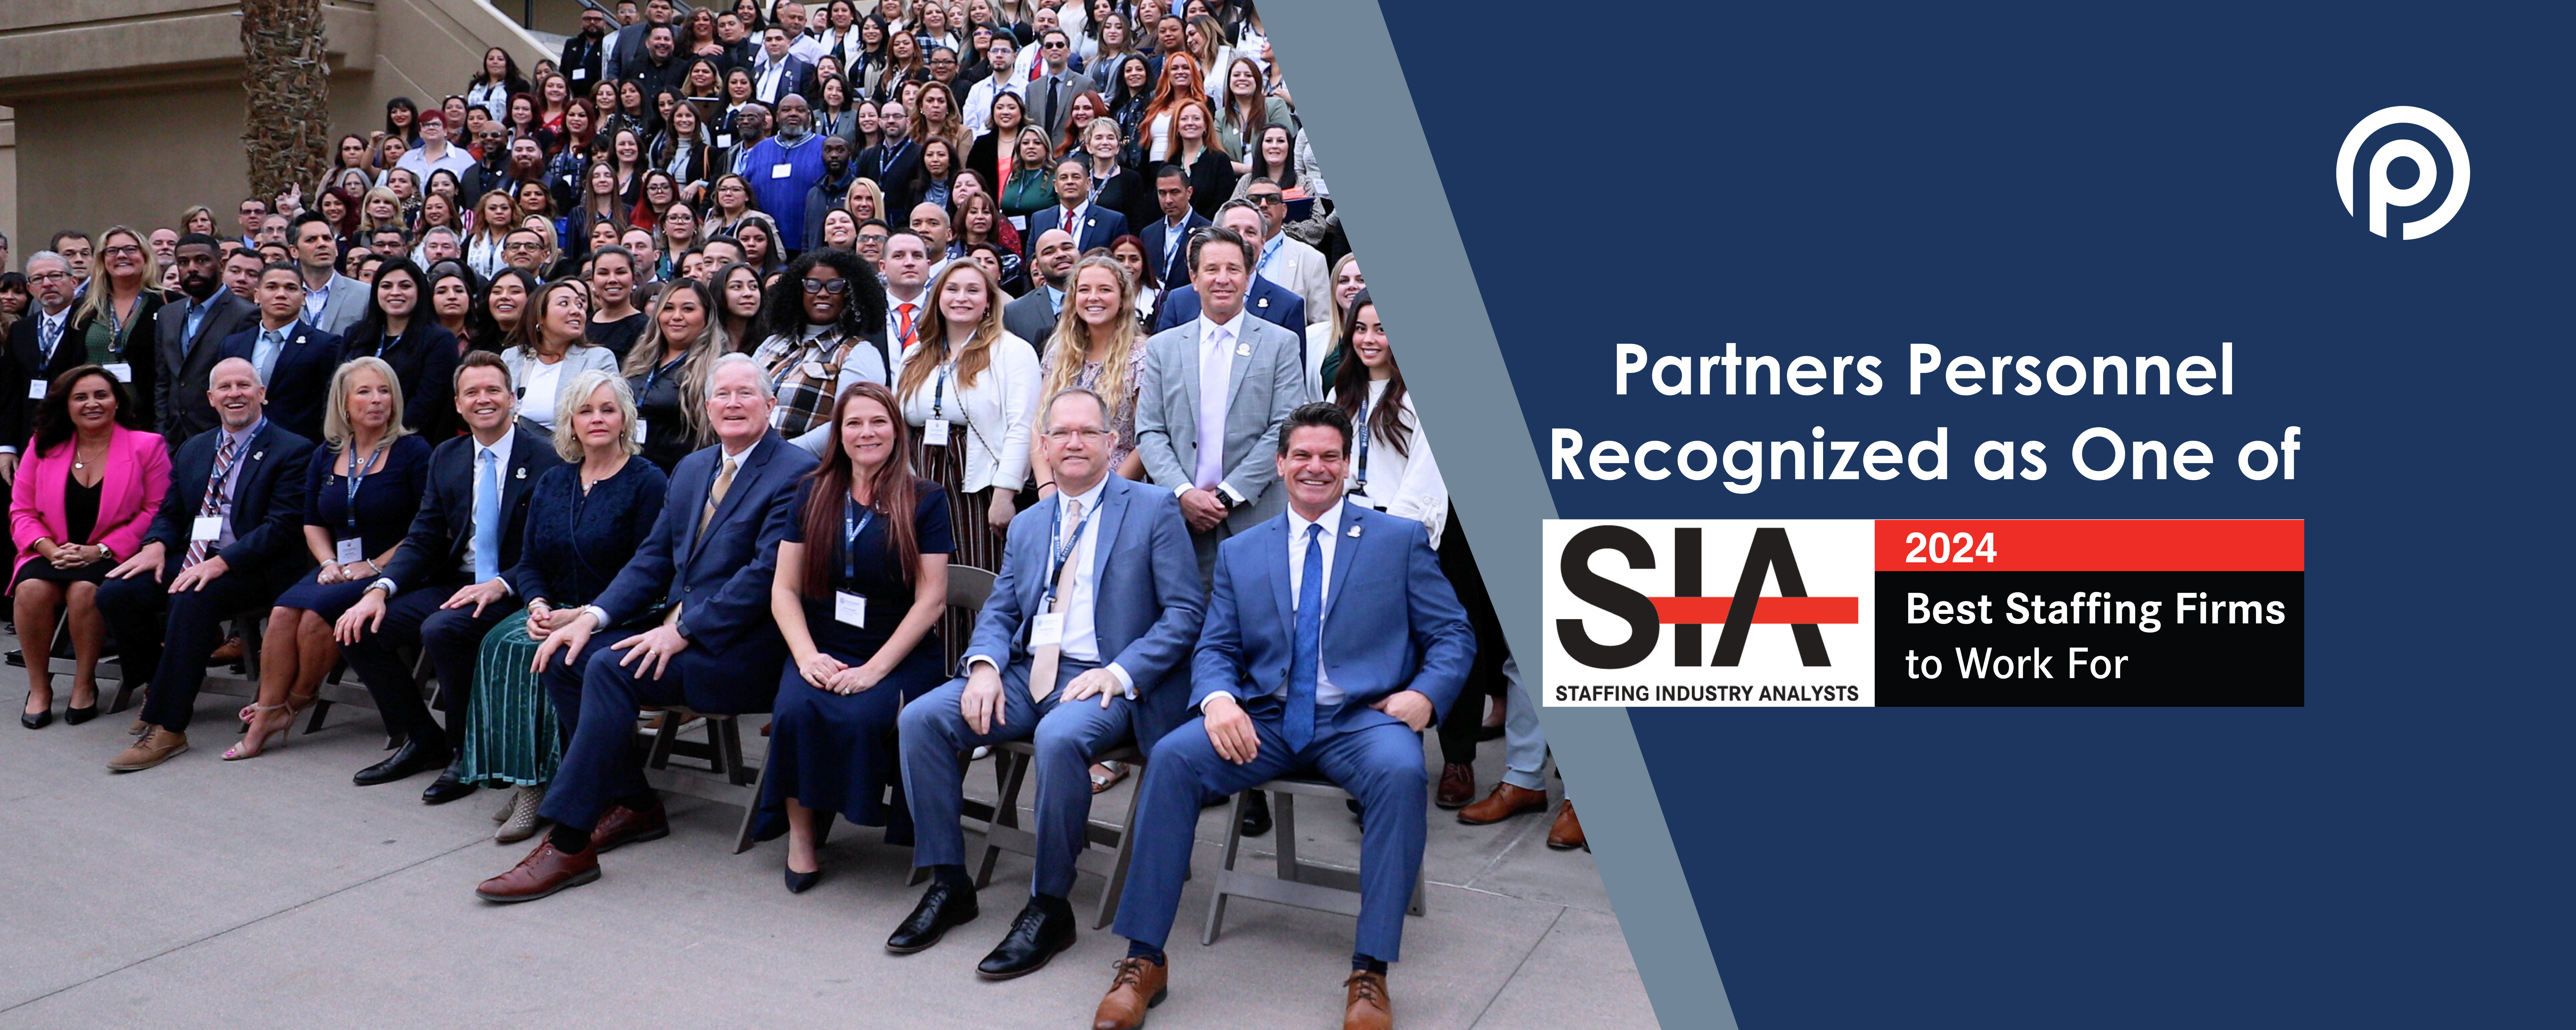 Partners Personnel recognized as one of SIA’s 2024 Best Staffing Firms To Work For